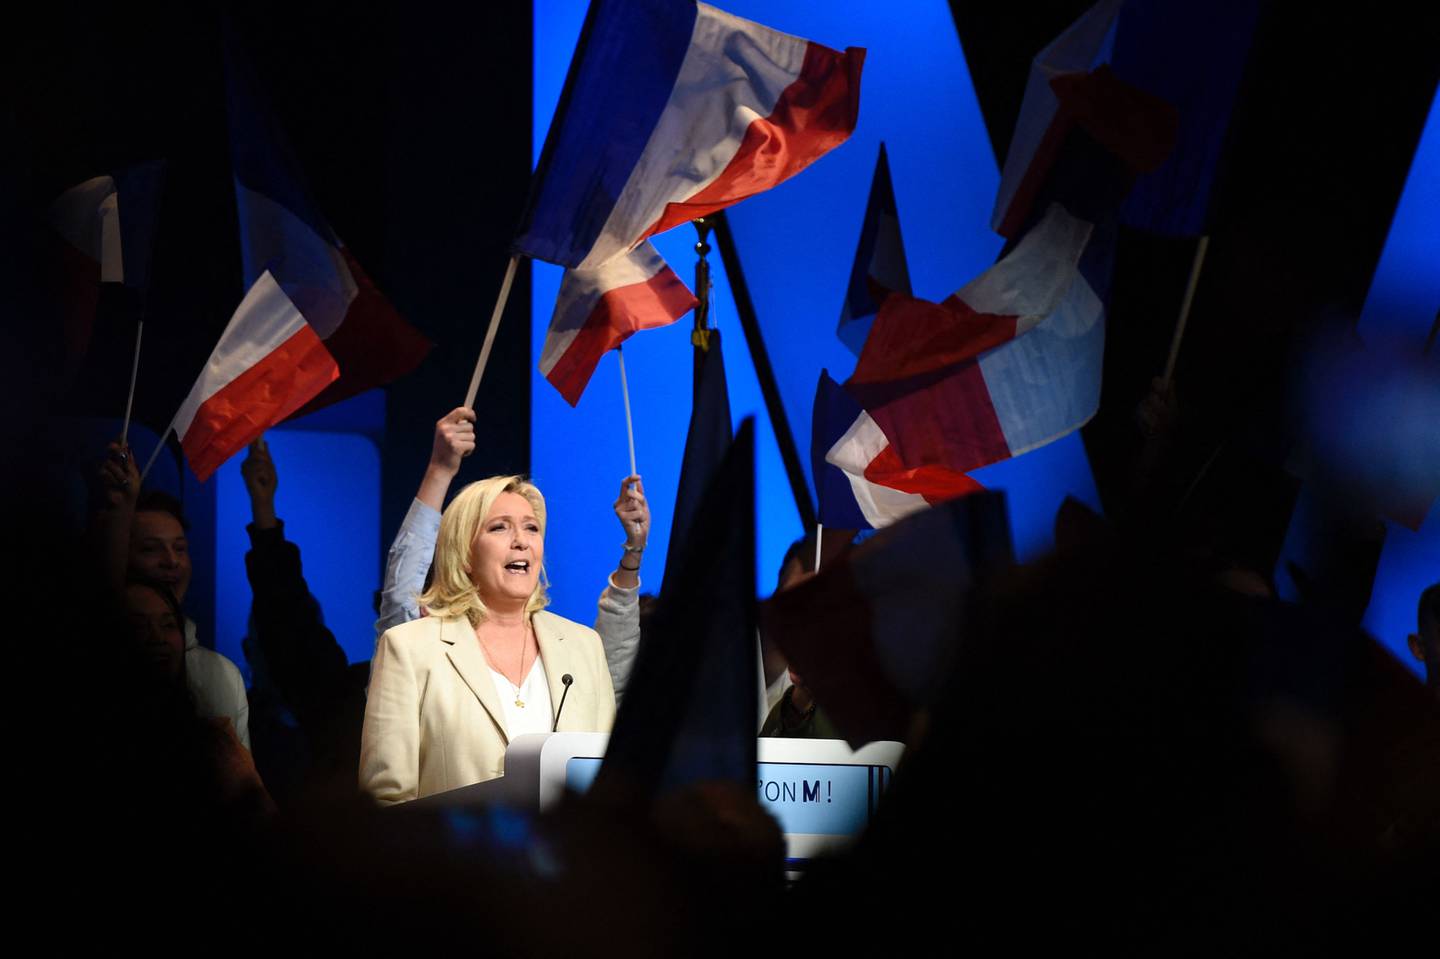 Supporters wave the national flags as Marine Le Pen gives a speech during a campaign rally in Stiring-Wendel. AFP